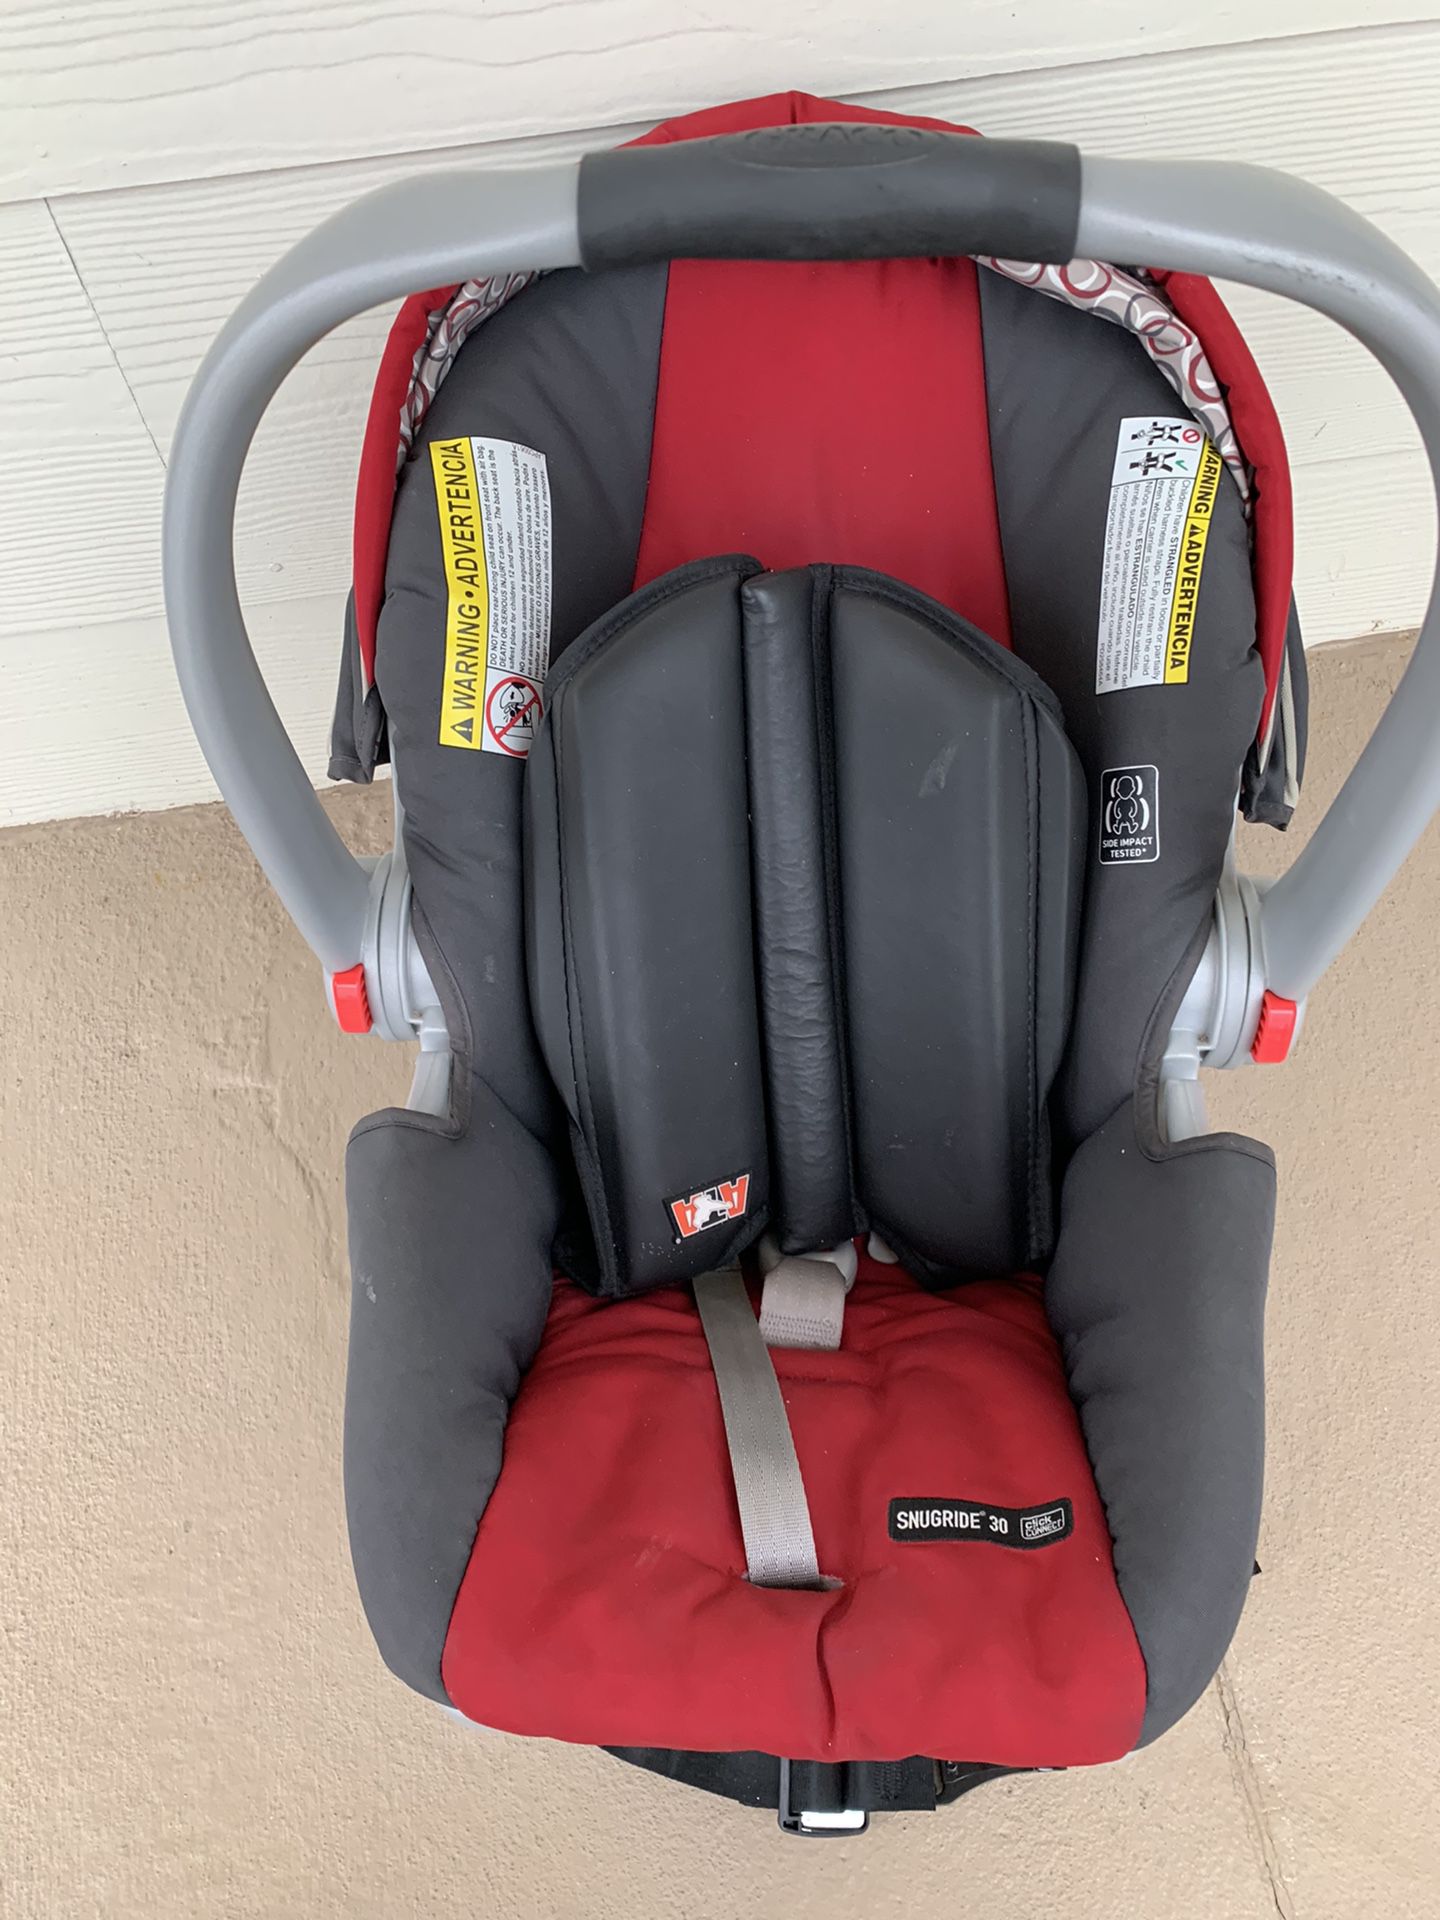 Graco Car seat And Stroller